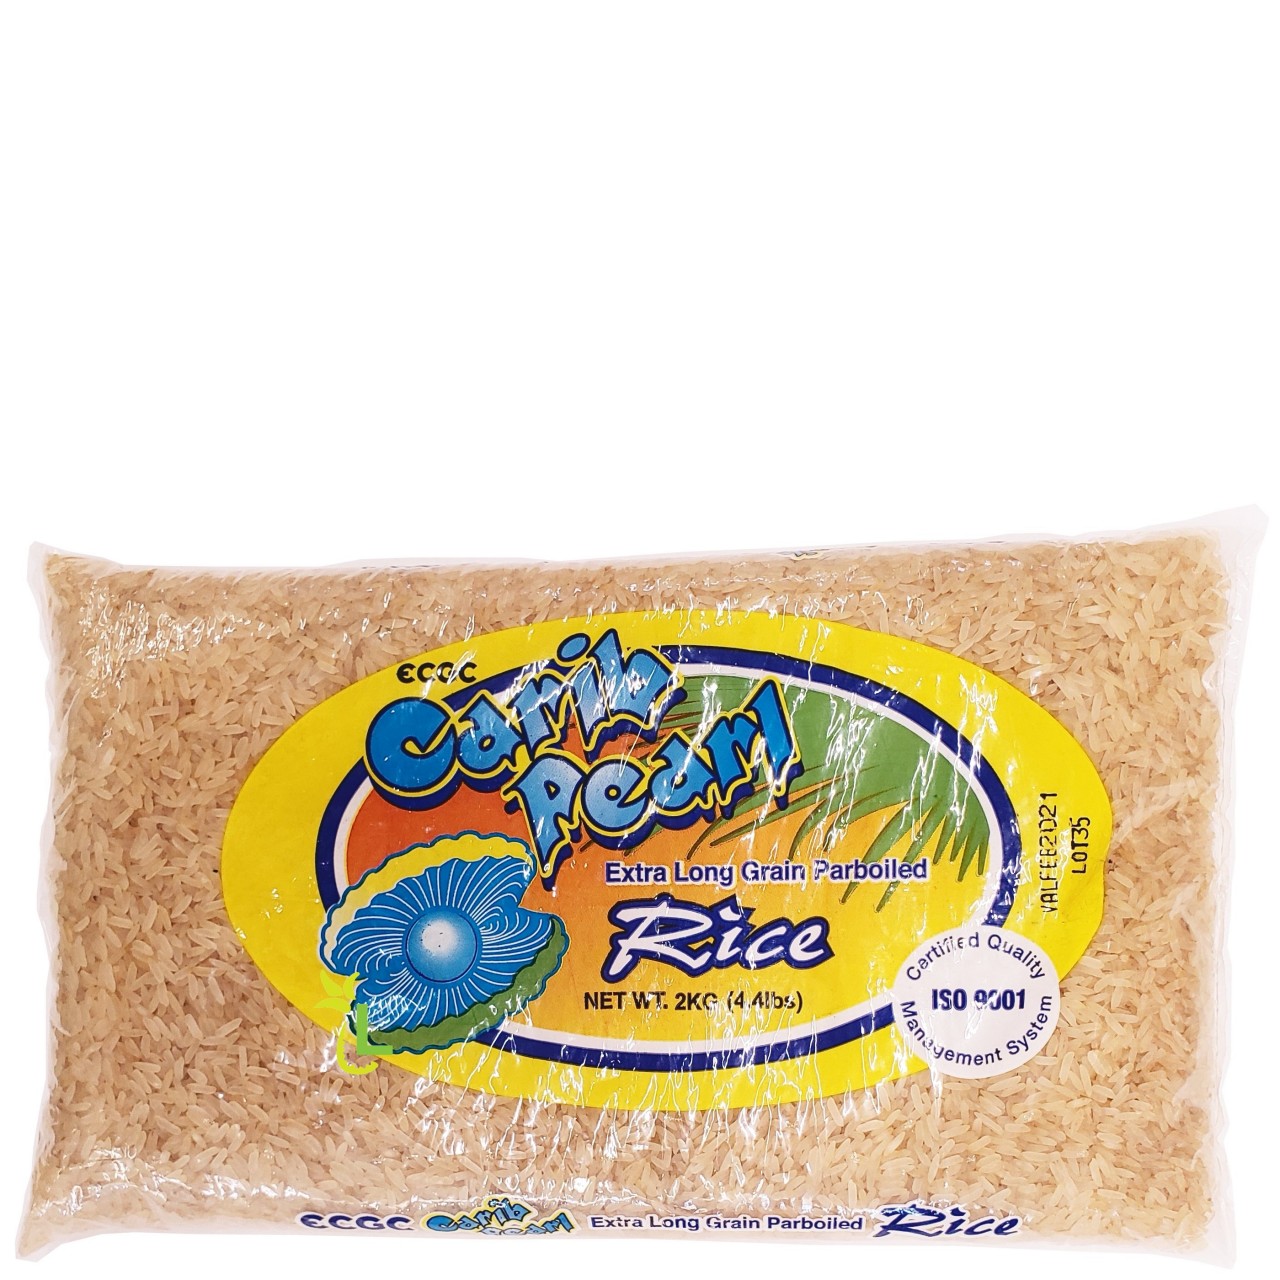 Carigold Parboiled Rice 2Kg